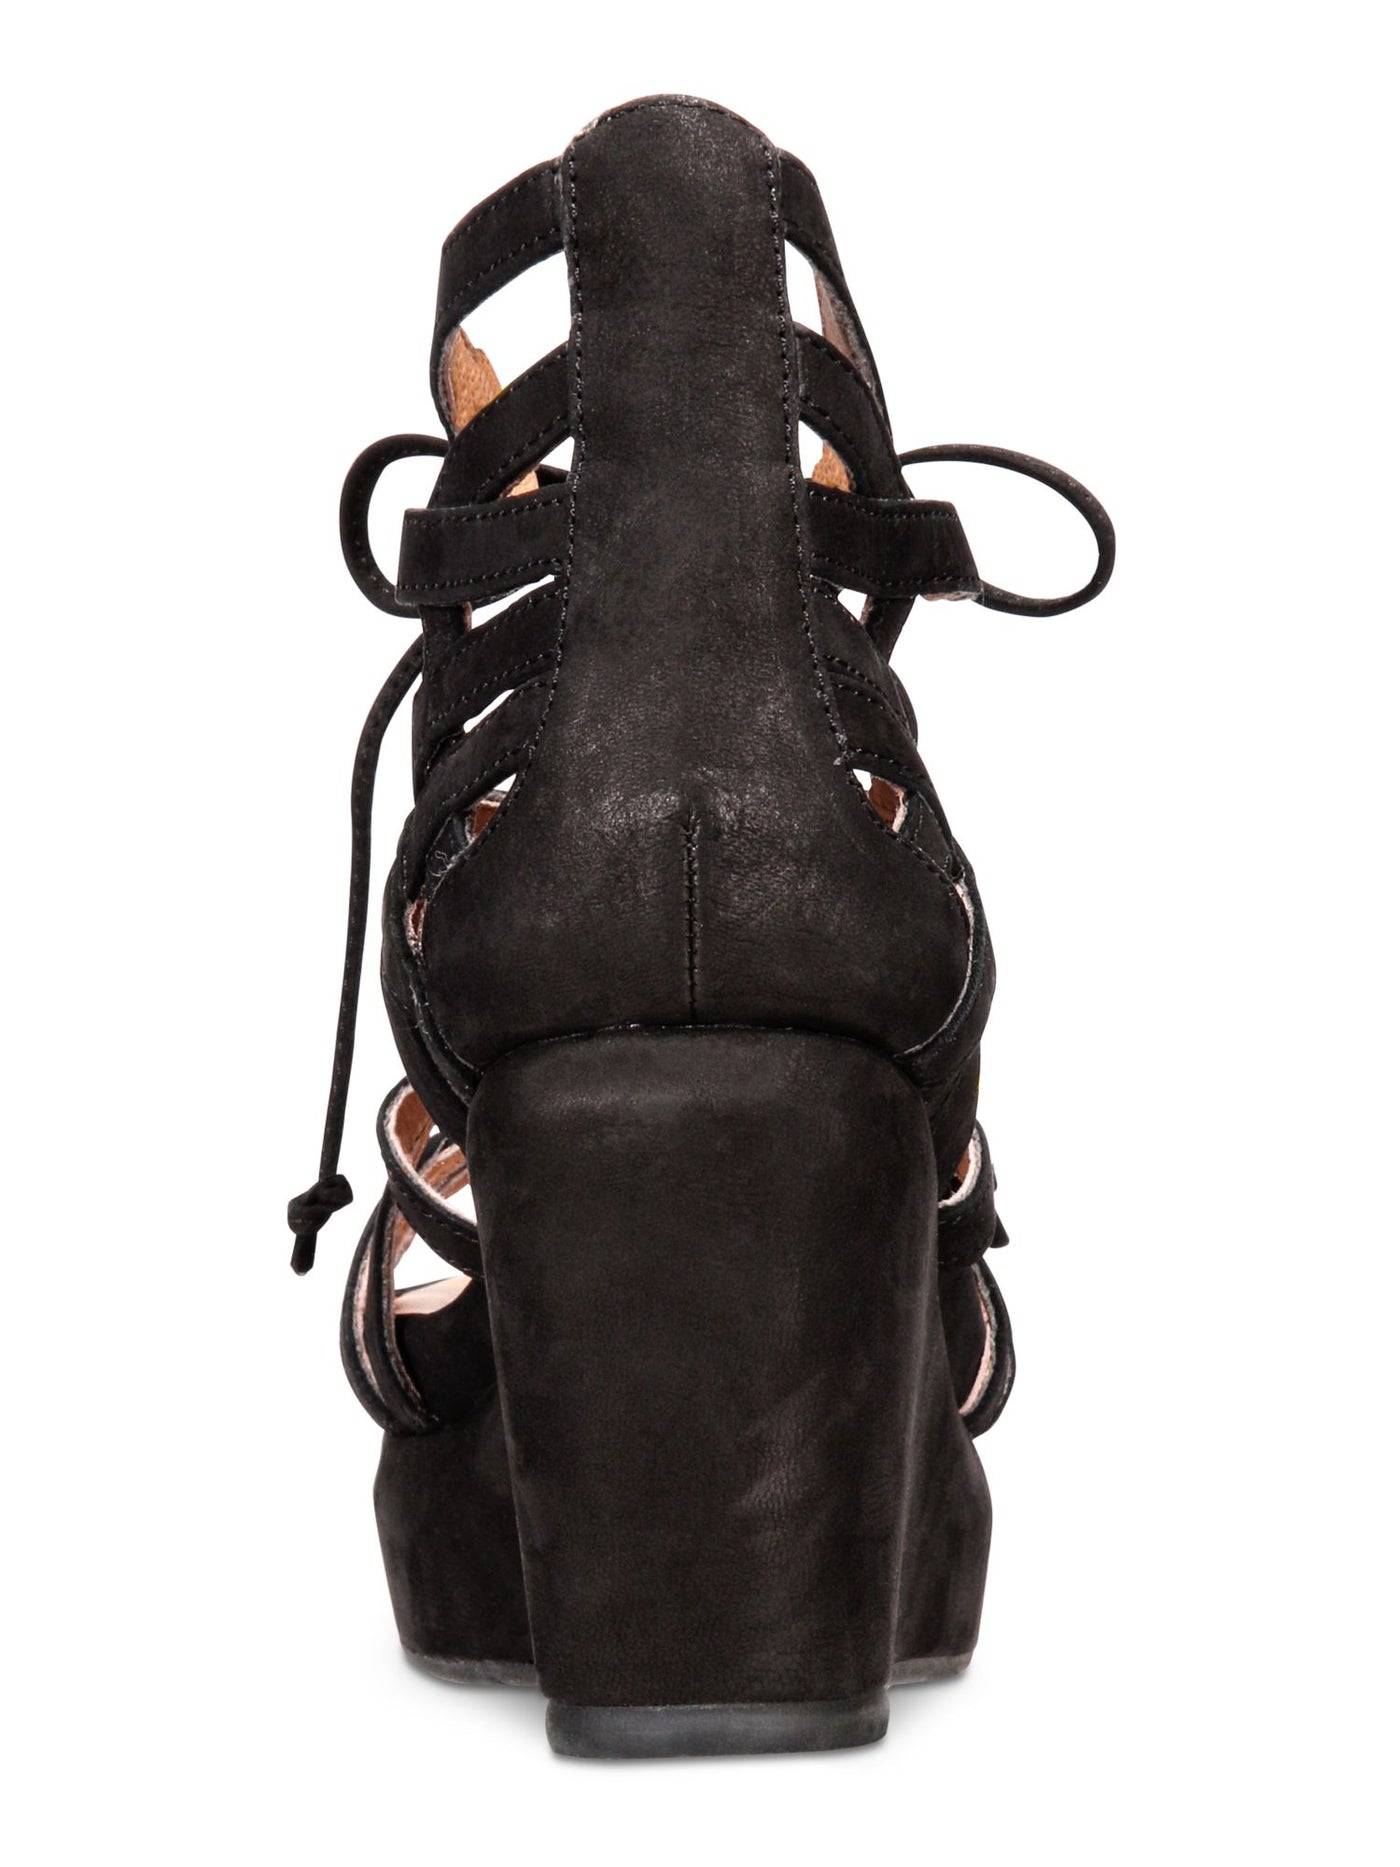 GENTLE SOULS KENNETH COLE Womens Black Crisscross Straps 1" Platform Strappy Joy Round Toe Wedge Lace-Up Leather Gladiator Sandals Shoes 6 M